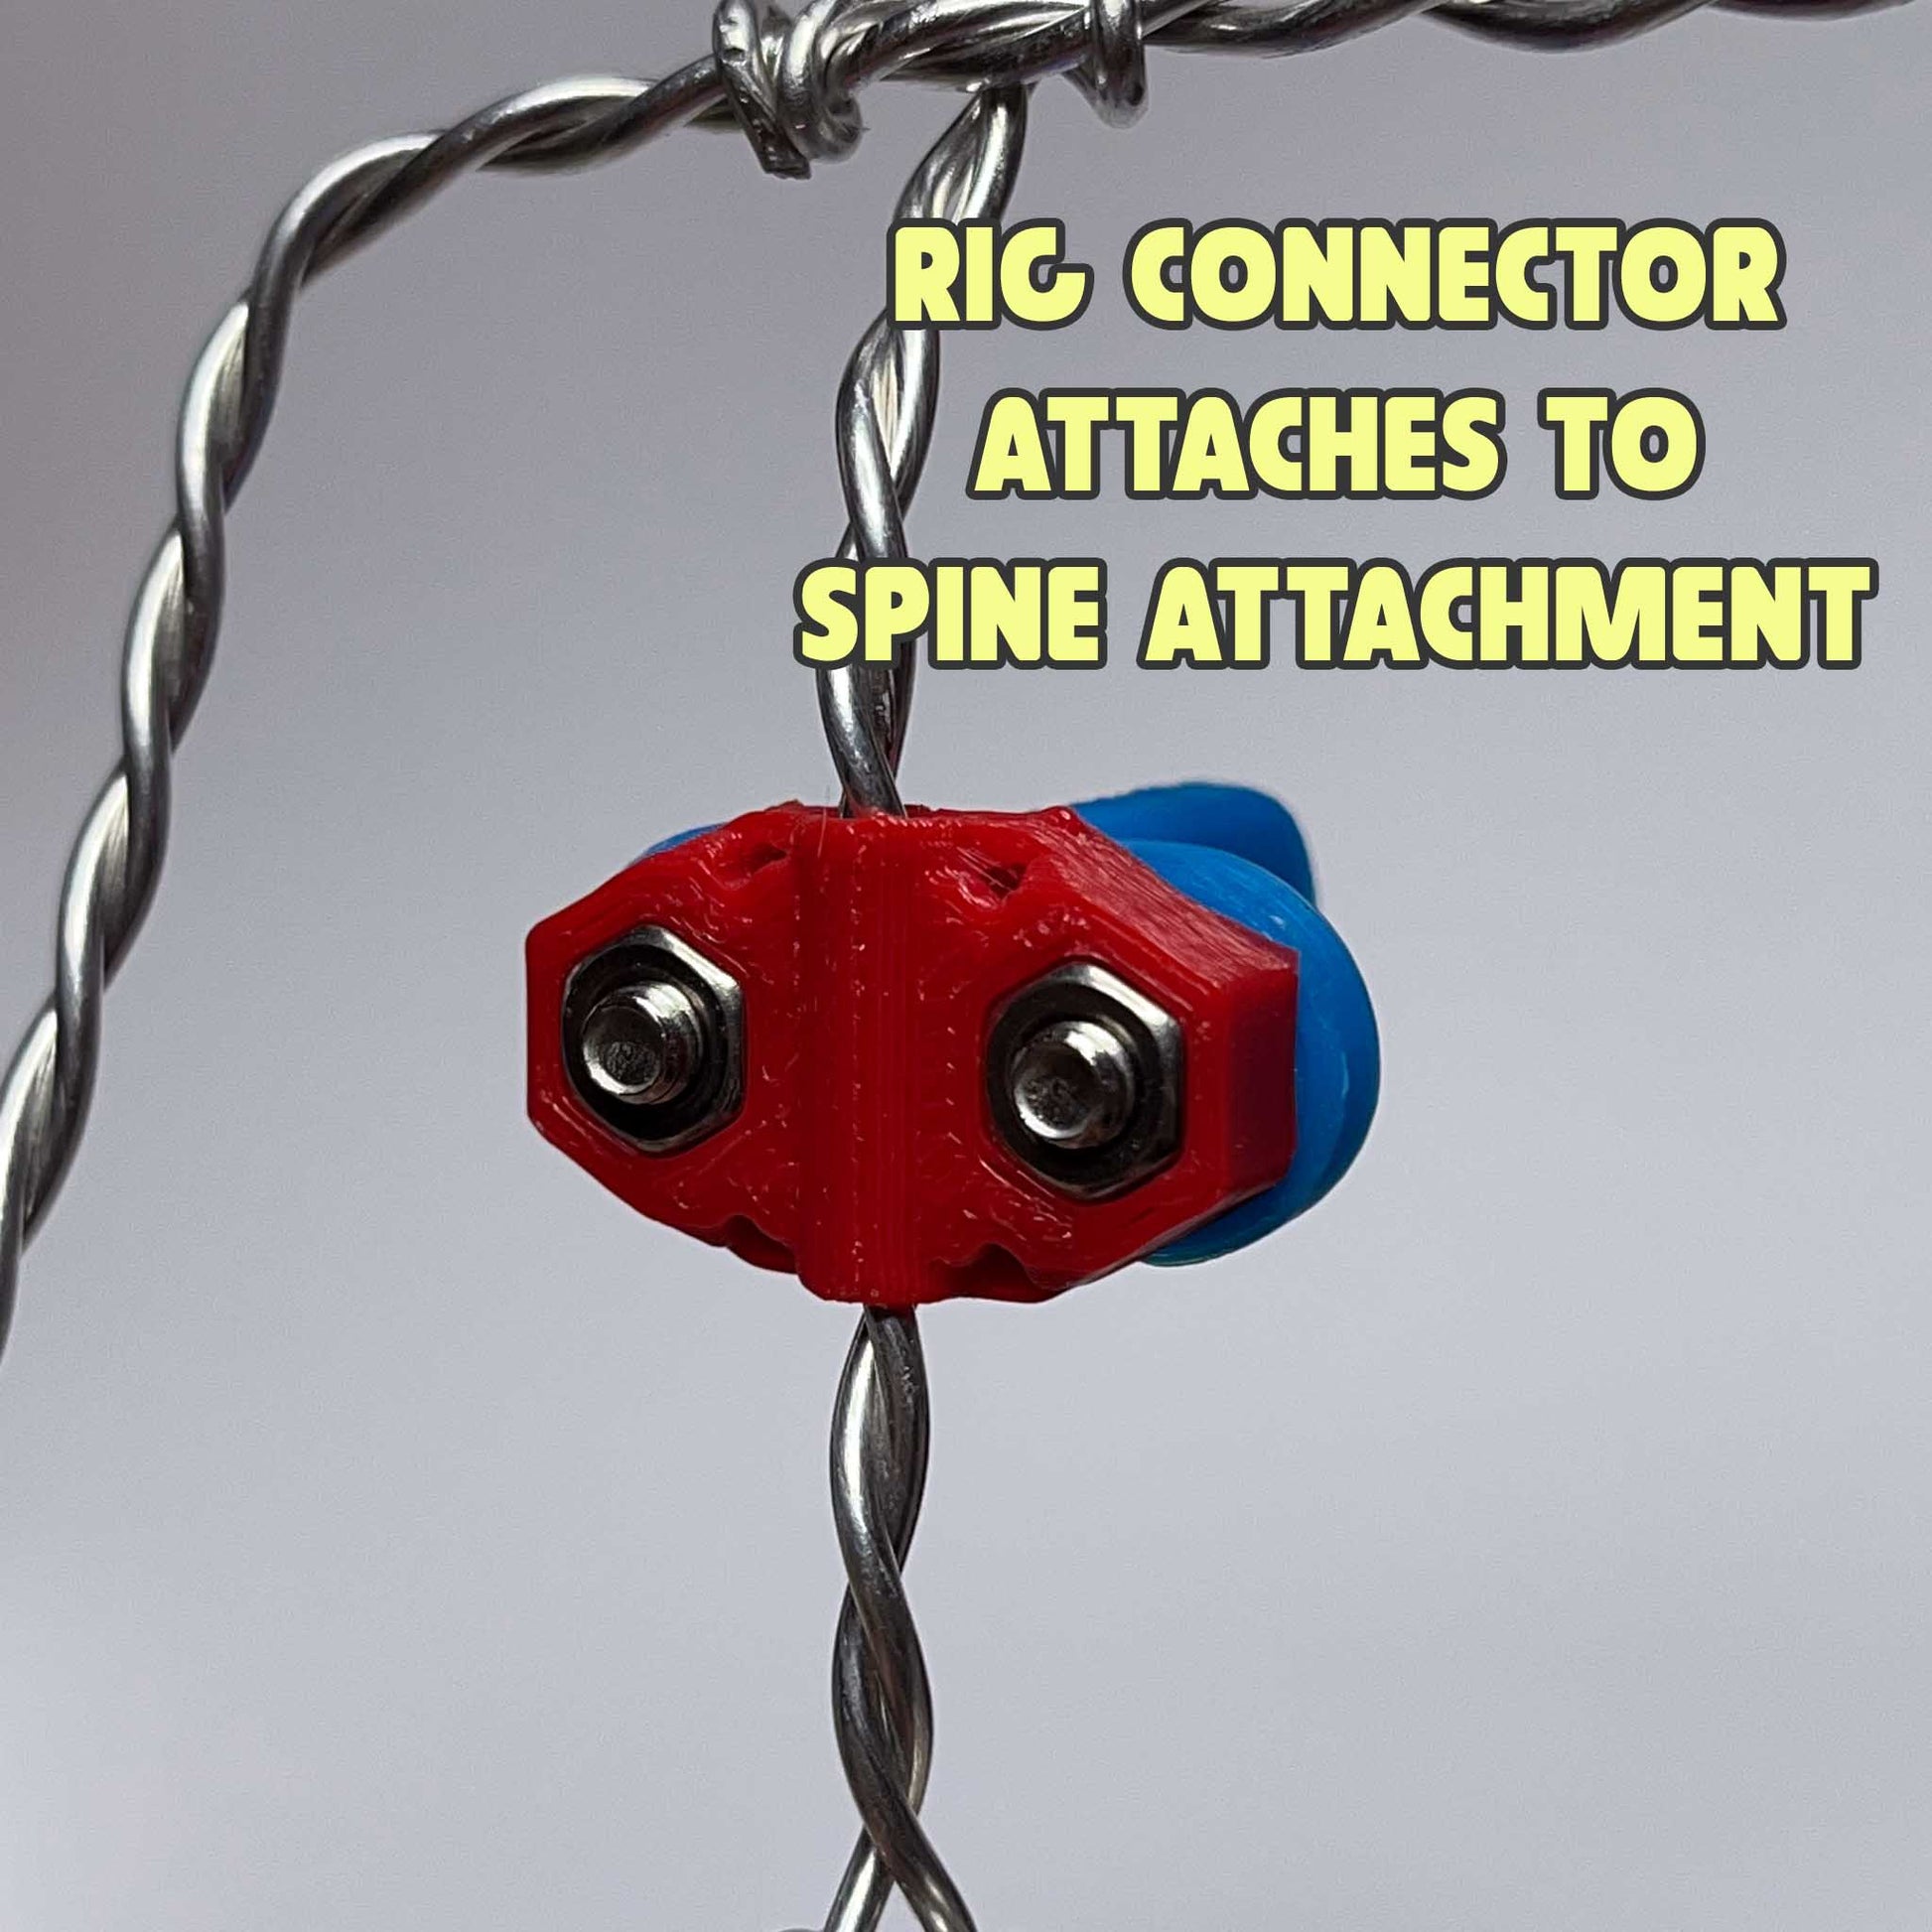 Bend-D's Flying Rig Connector and Spine Attachment